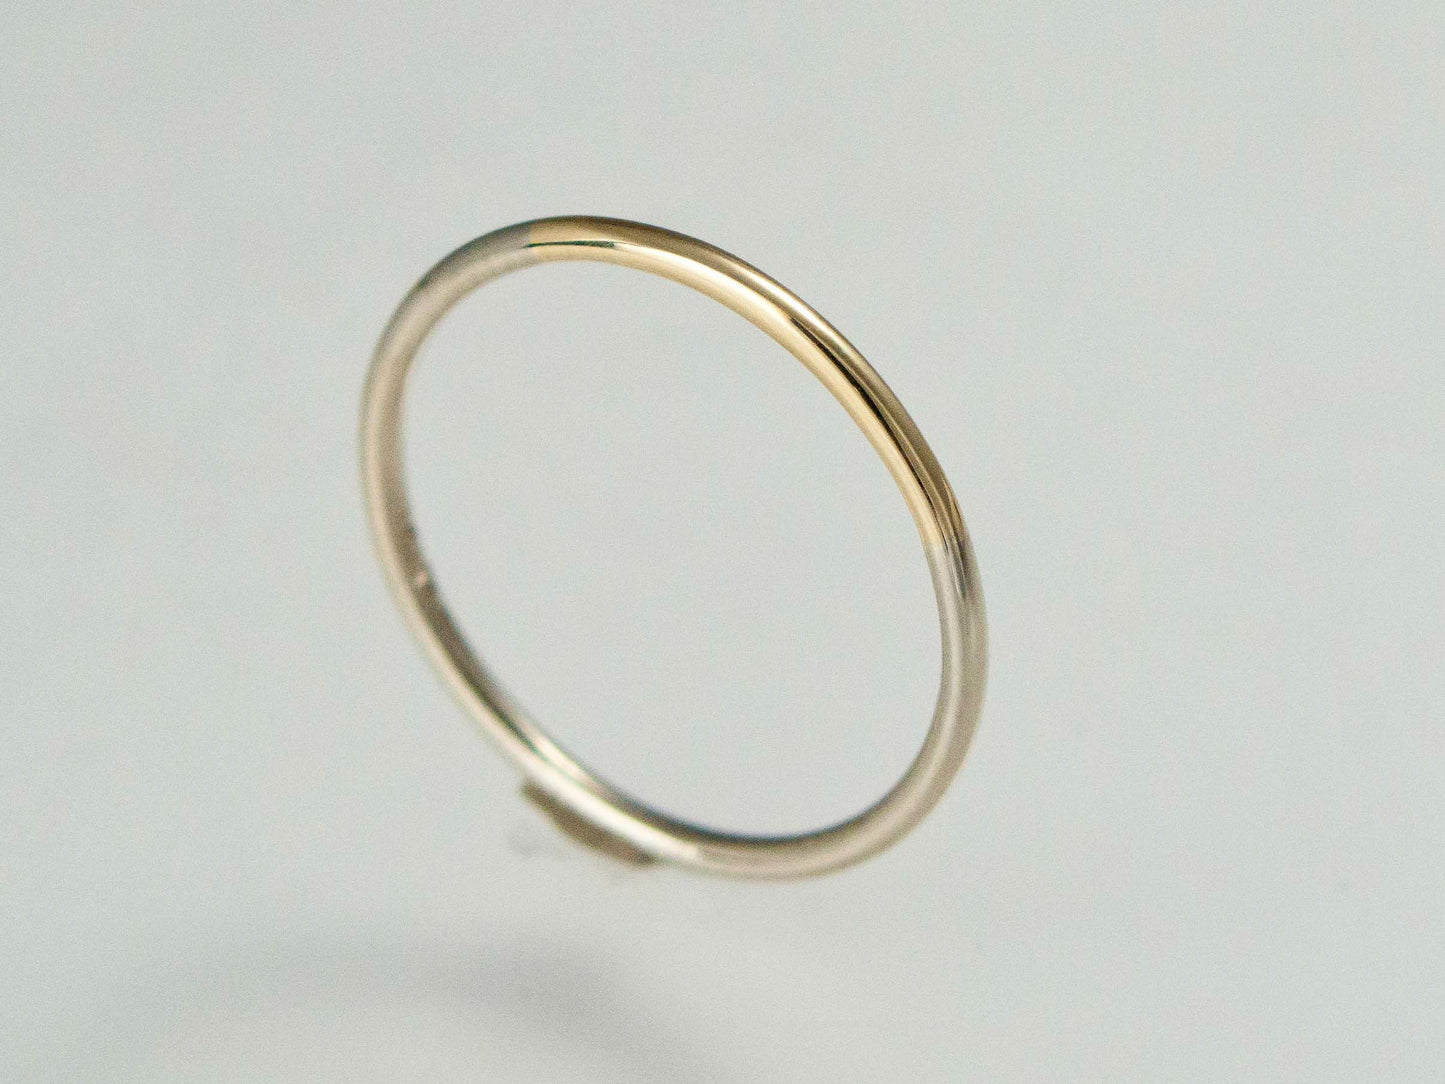 Round Two Tone Women's Wedding Band - Married Metals Wedding Ring in a mix of Yellow, White or Rose Gold